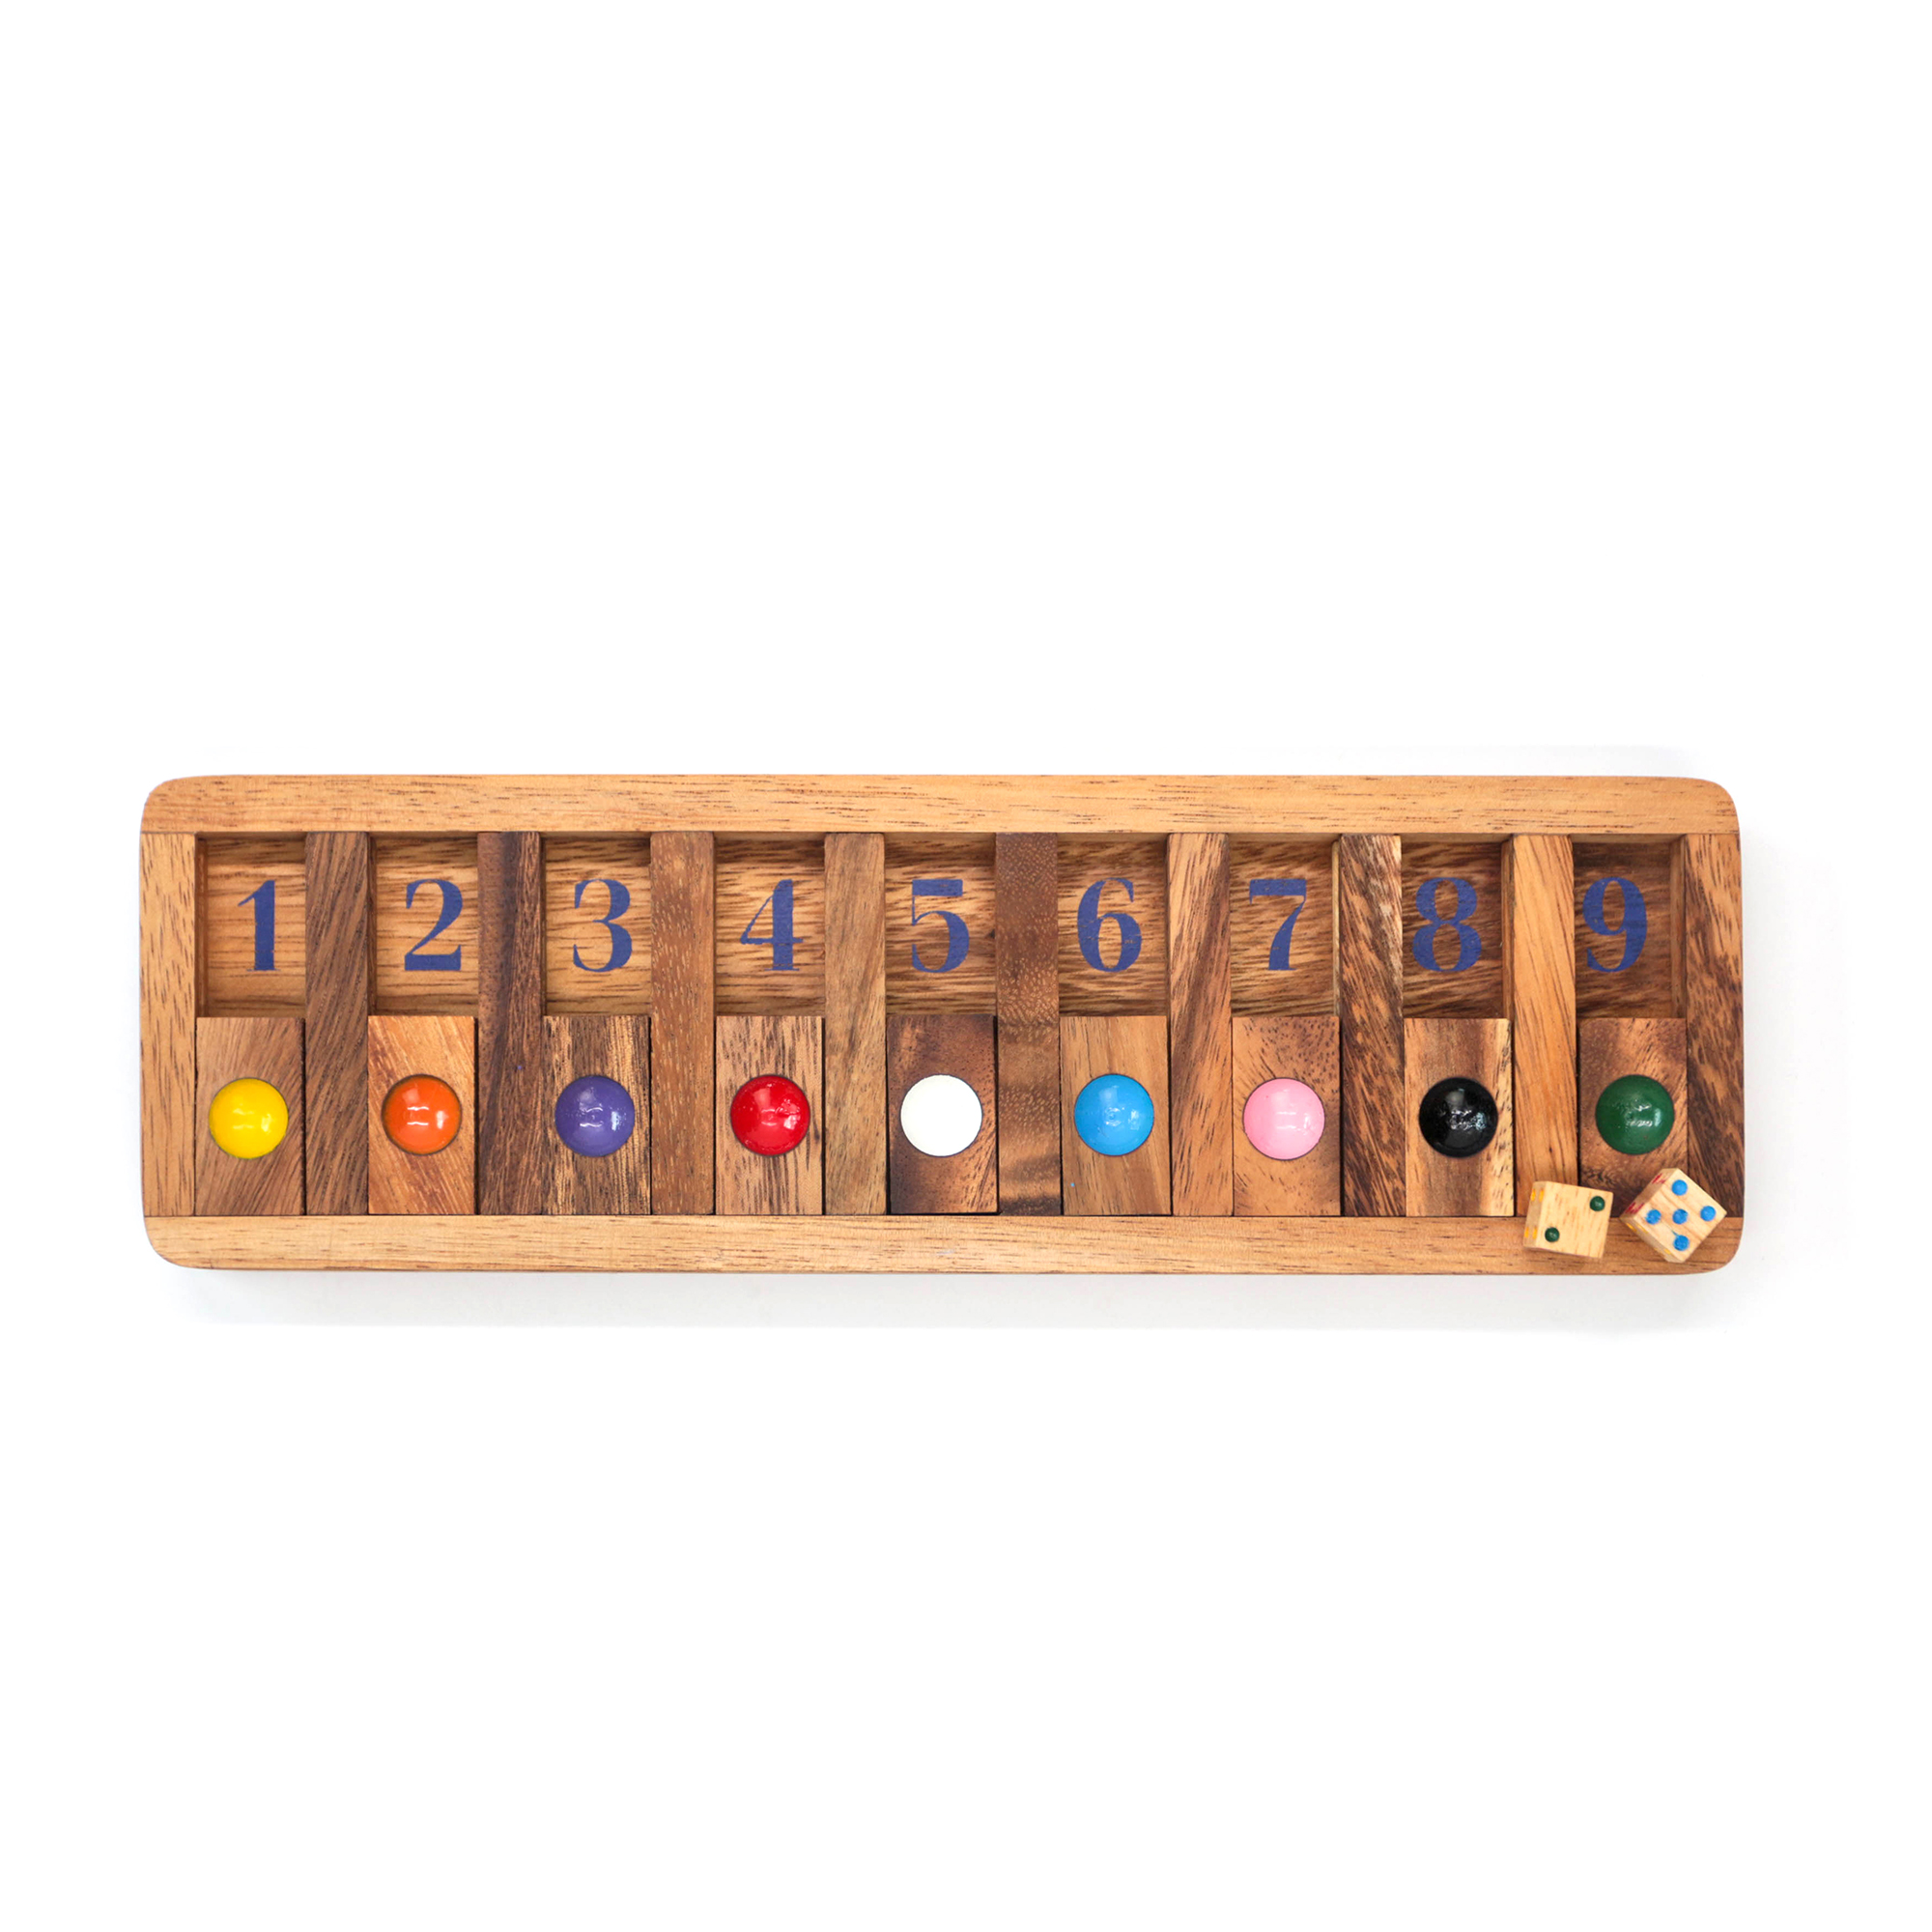  Schylling Brand Shut The Box Game - Classic Tabletop Dice Game  - Great for Families, Counting, and Math Skills - Ages 6 and Up : Toys &  Games